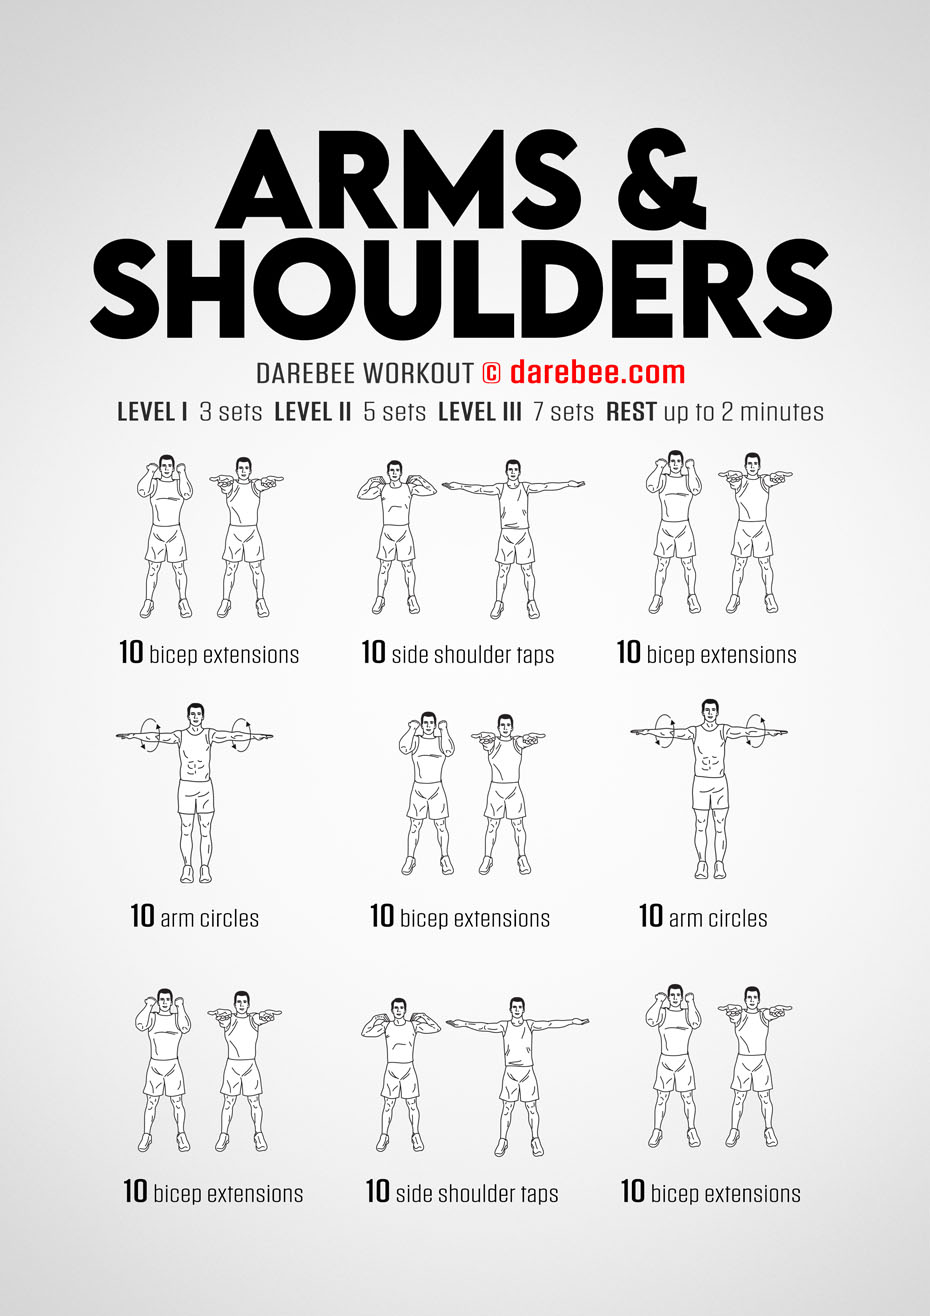 The Best Arm Exercises & Workouts, Arms and Shoulders Exercises